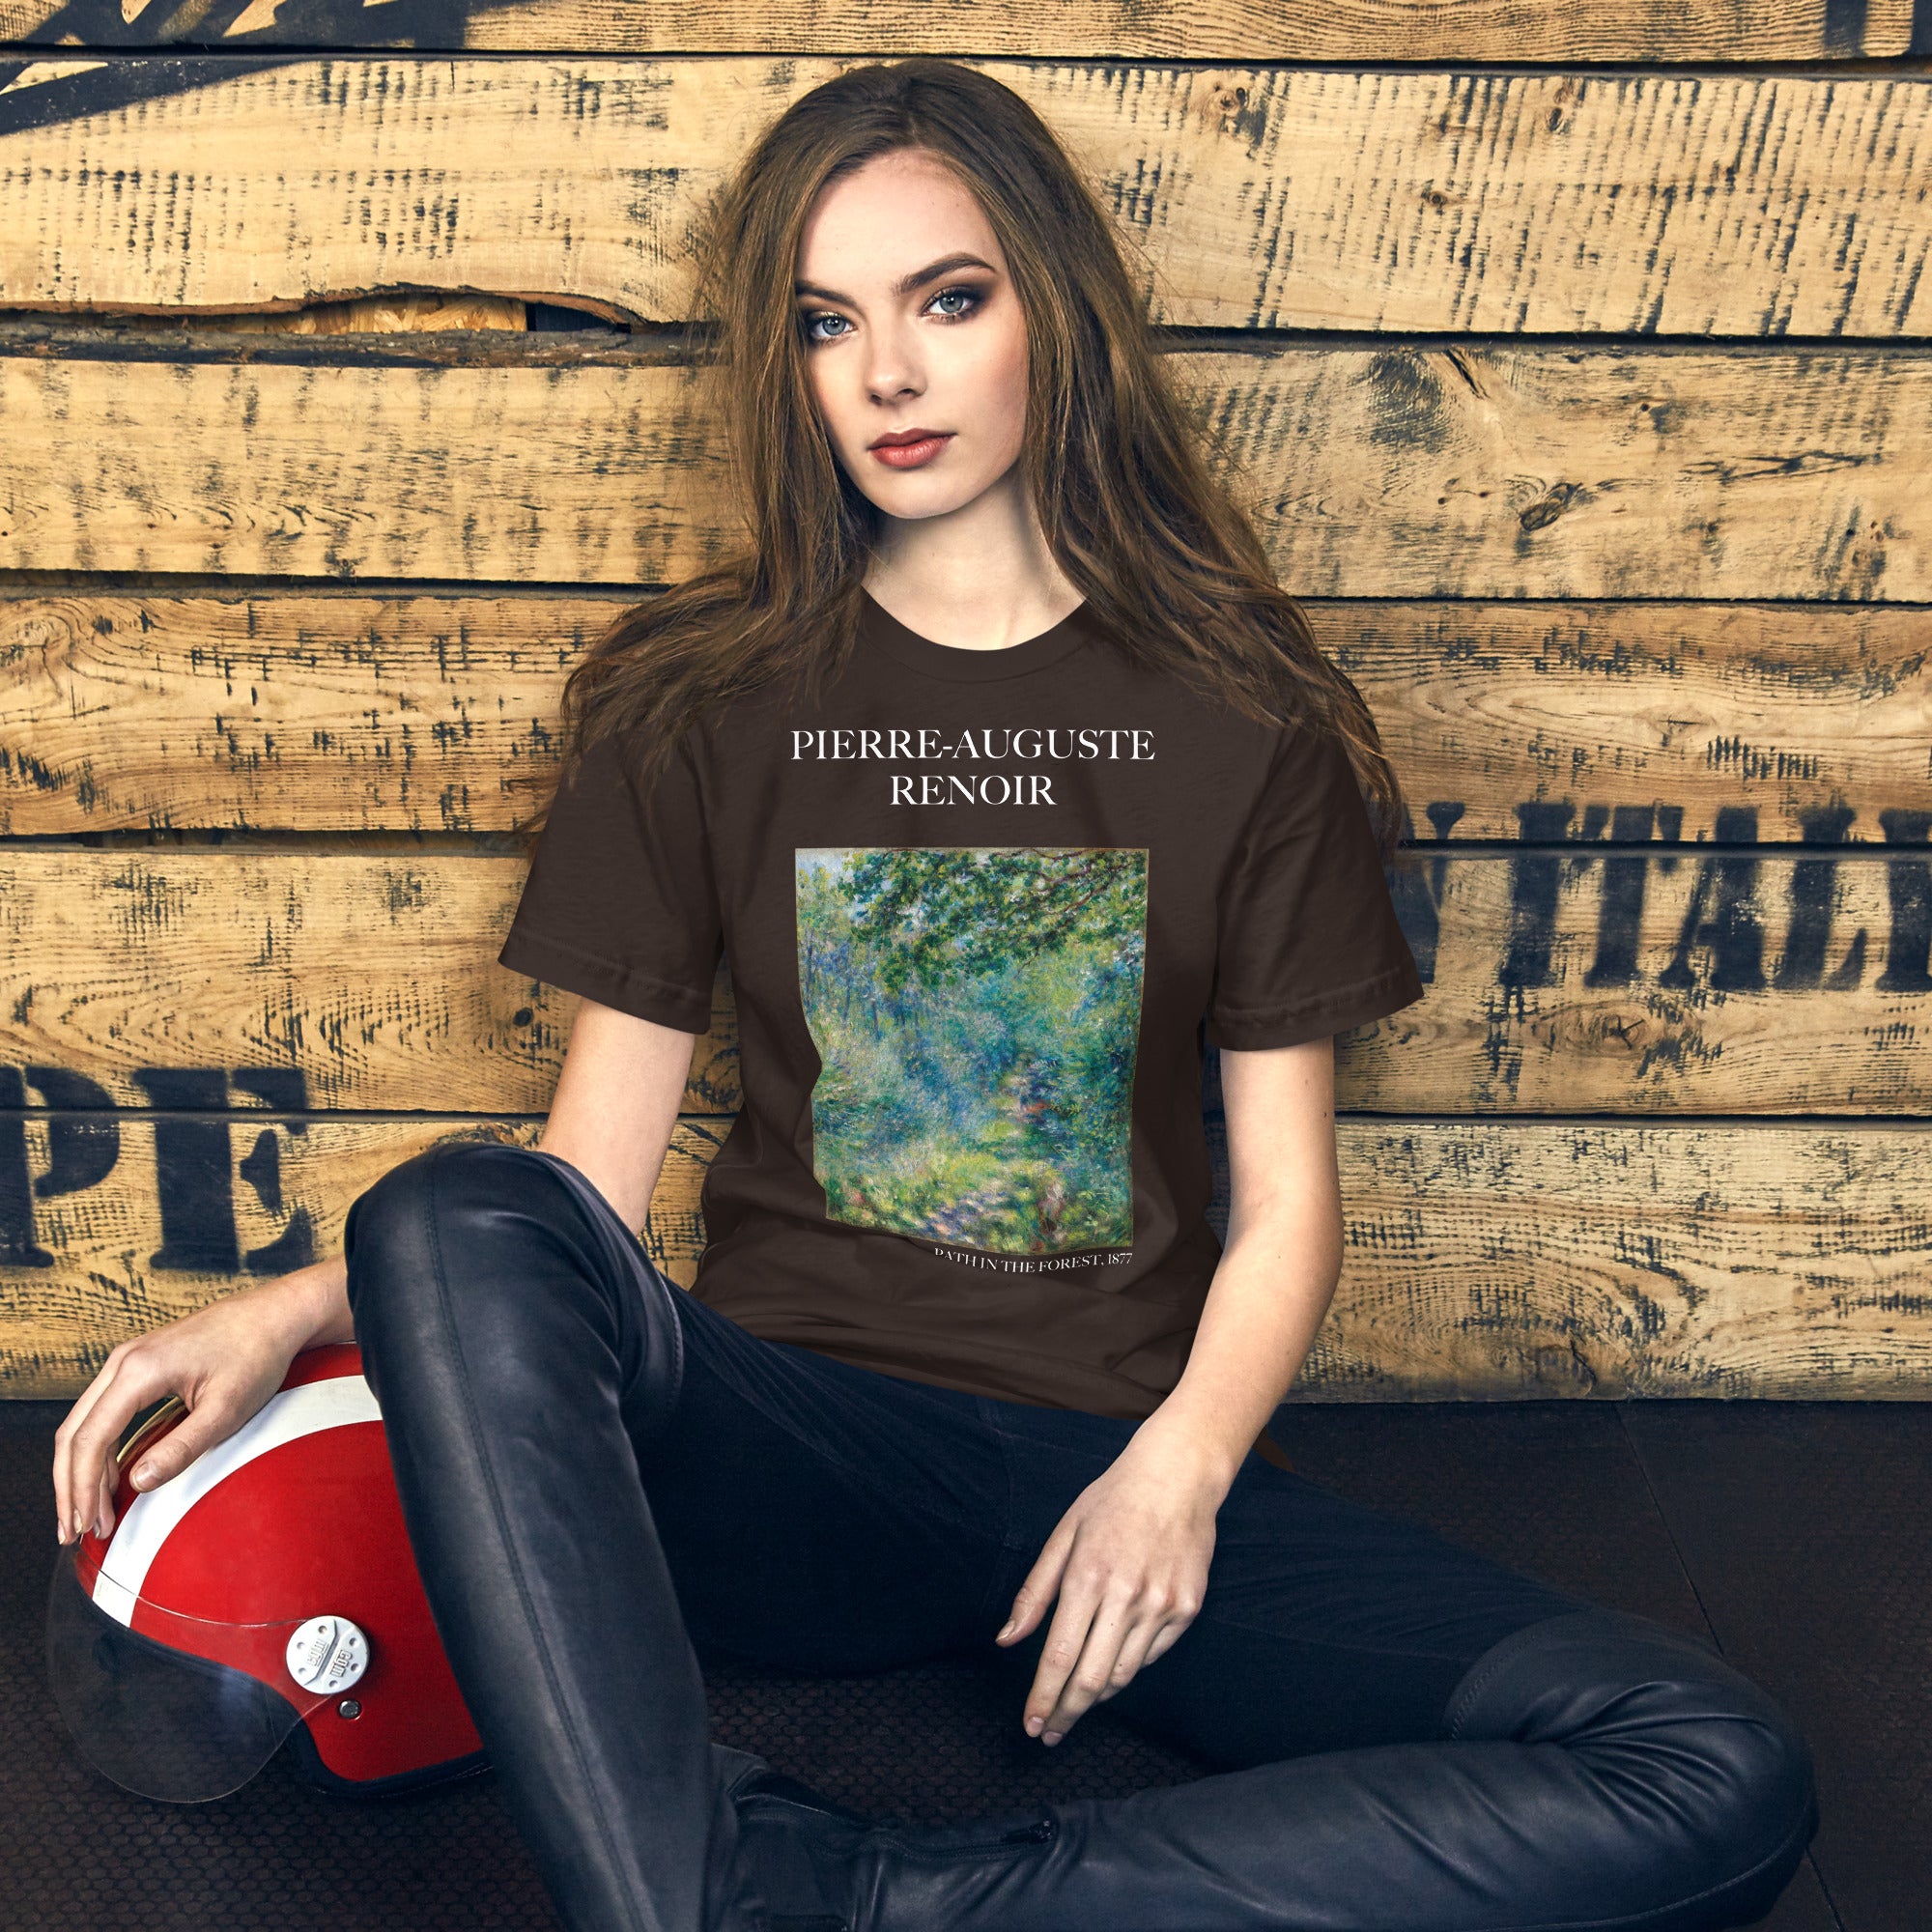 Pierre-Auguste Renoir 'Path in the Forest' Famous Painting T-Shirt | Unisex Classic Art Tee